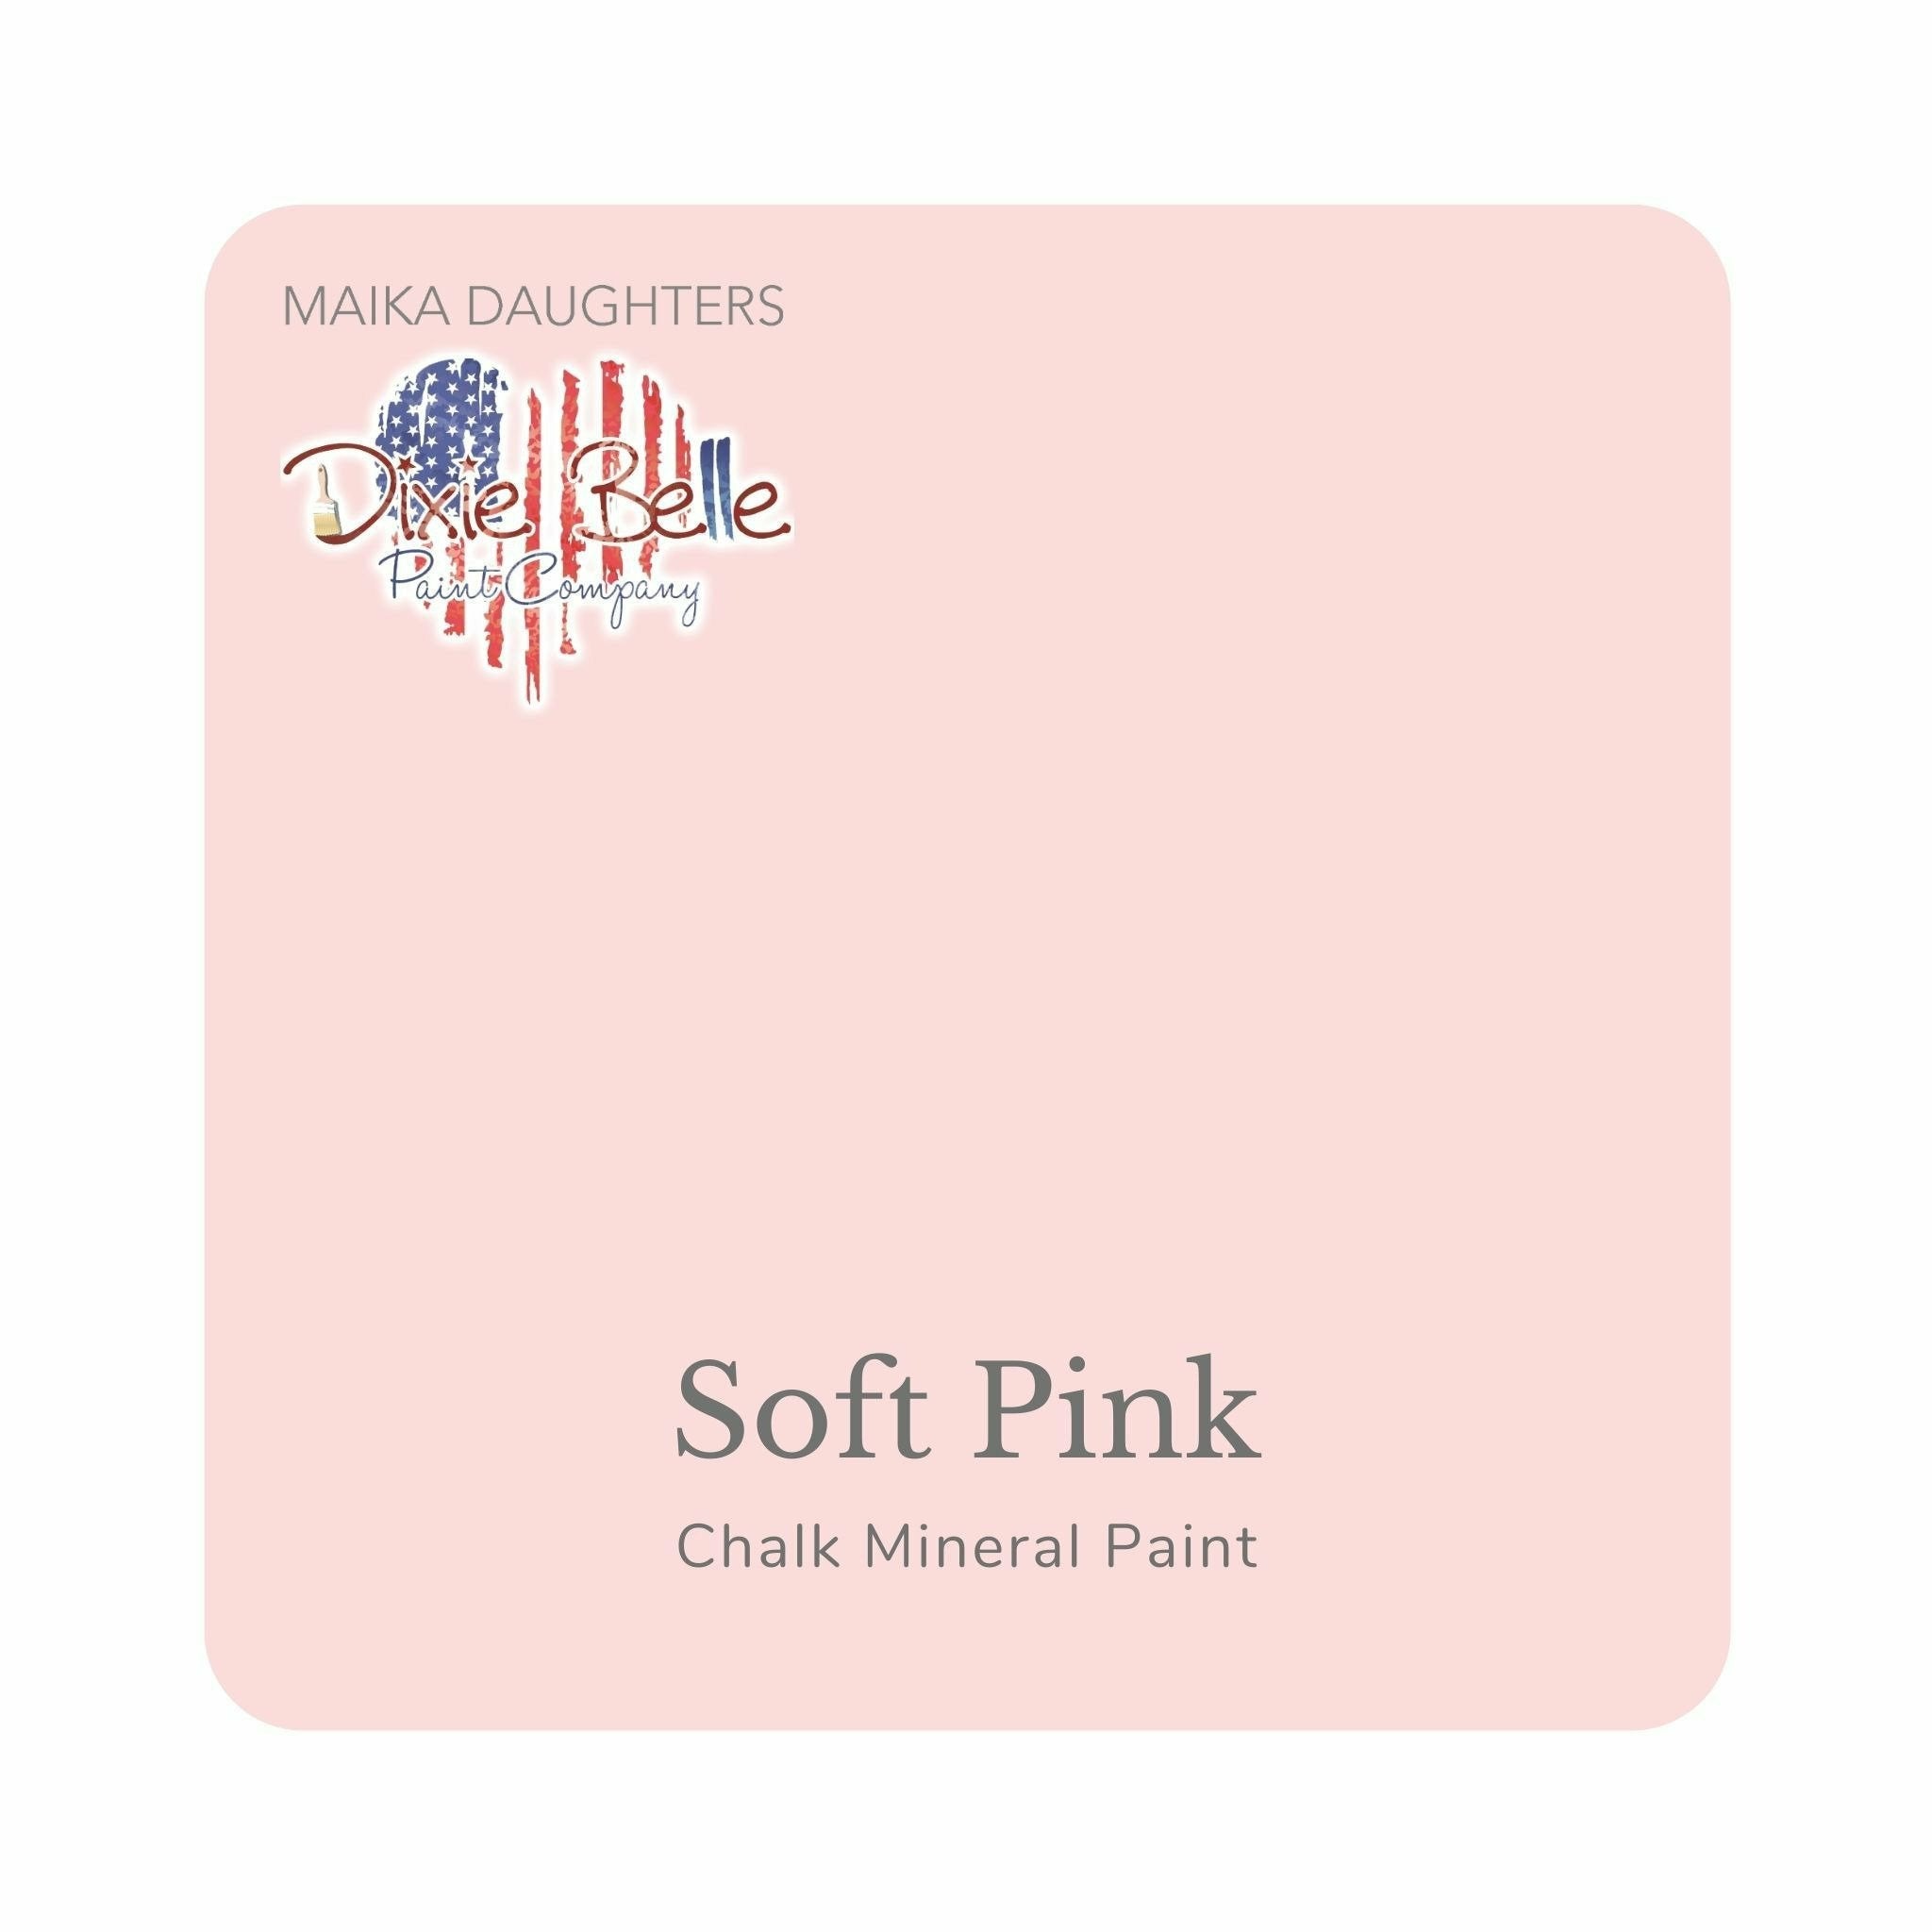 A square swatch card of Dixie Belle Paint Company’s Soft Pink Chalk Mineral Paint is against a white background. This color is a delicate pale blush.